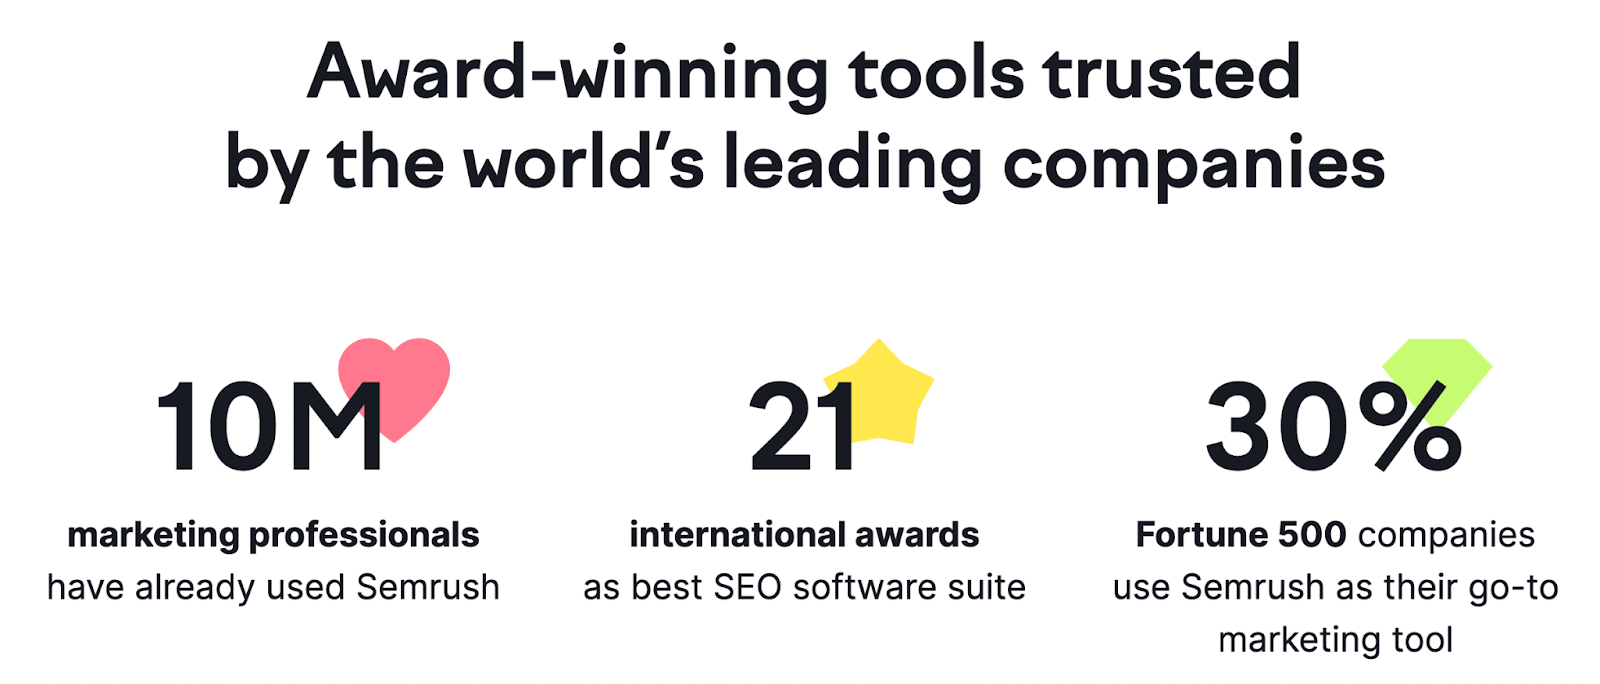 Semrush’s website with metrics "10M marketing professionals have already used Semrush," "21 international awards as best SEO software suite" and "30% Fortune 500 companies use Semrush as their go-to marketing tool"